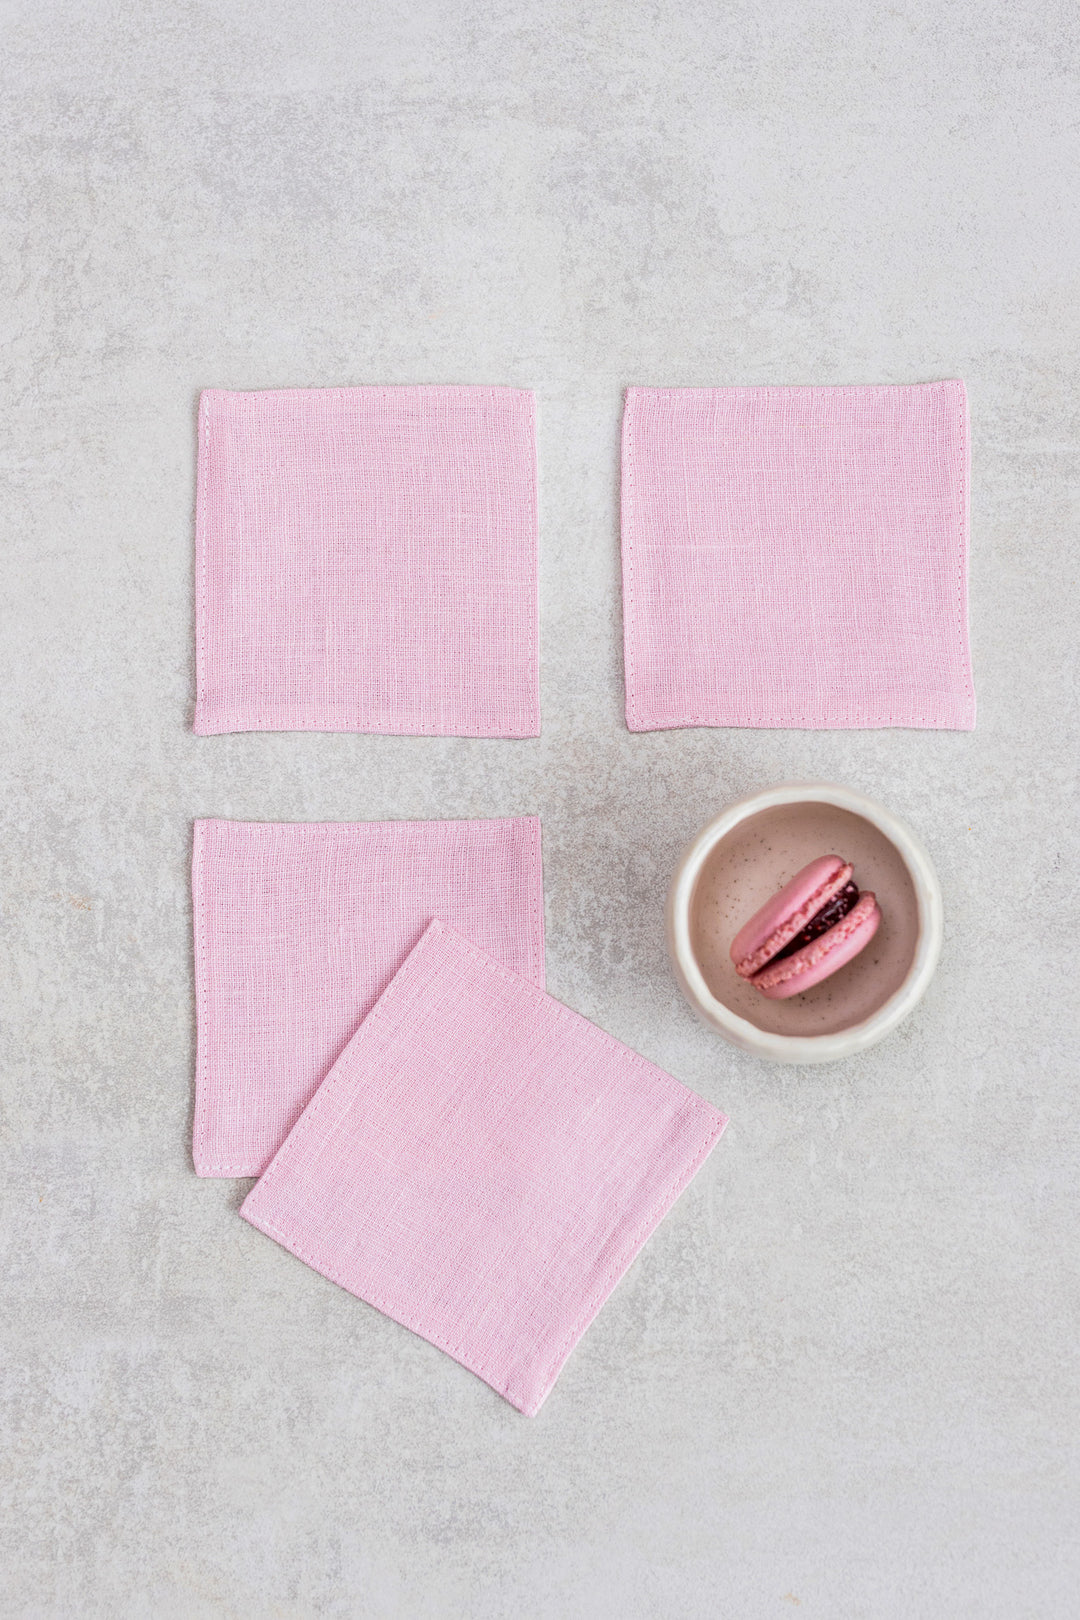 Dusty Rose Linen Coasters Set Of 4 - Daily Linen